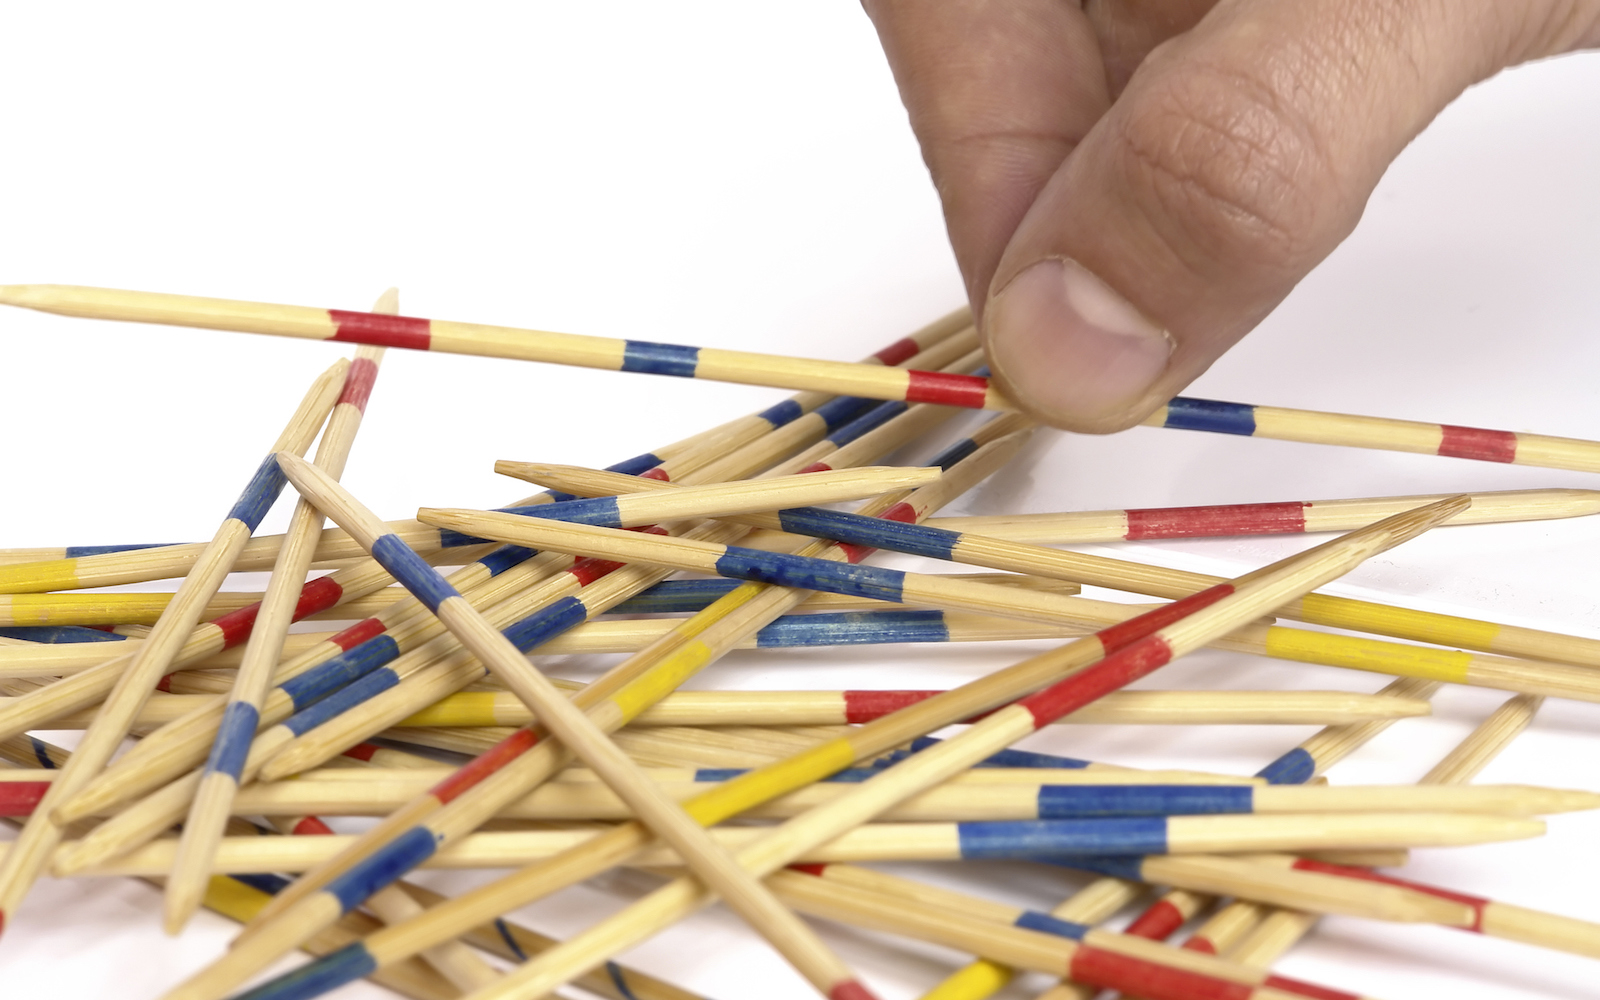 Bring Back Some Old-School Toys and We’ll Guess Your Age With Surprising Accuracy Pick up sticks